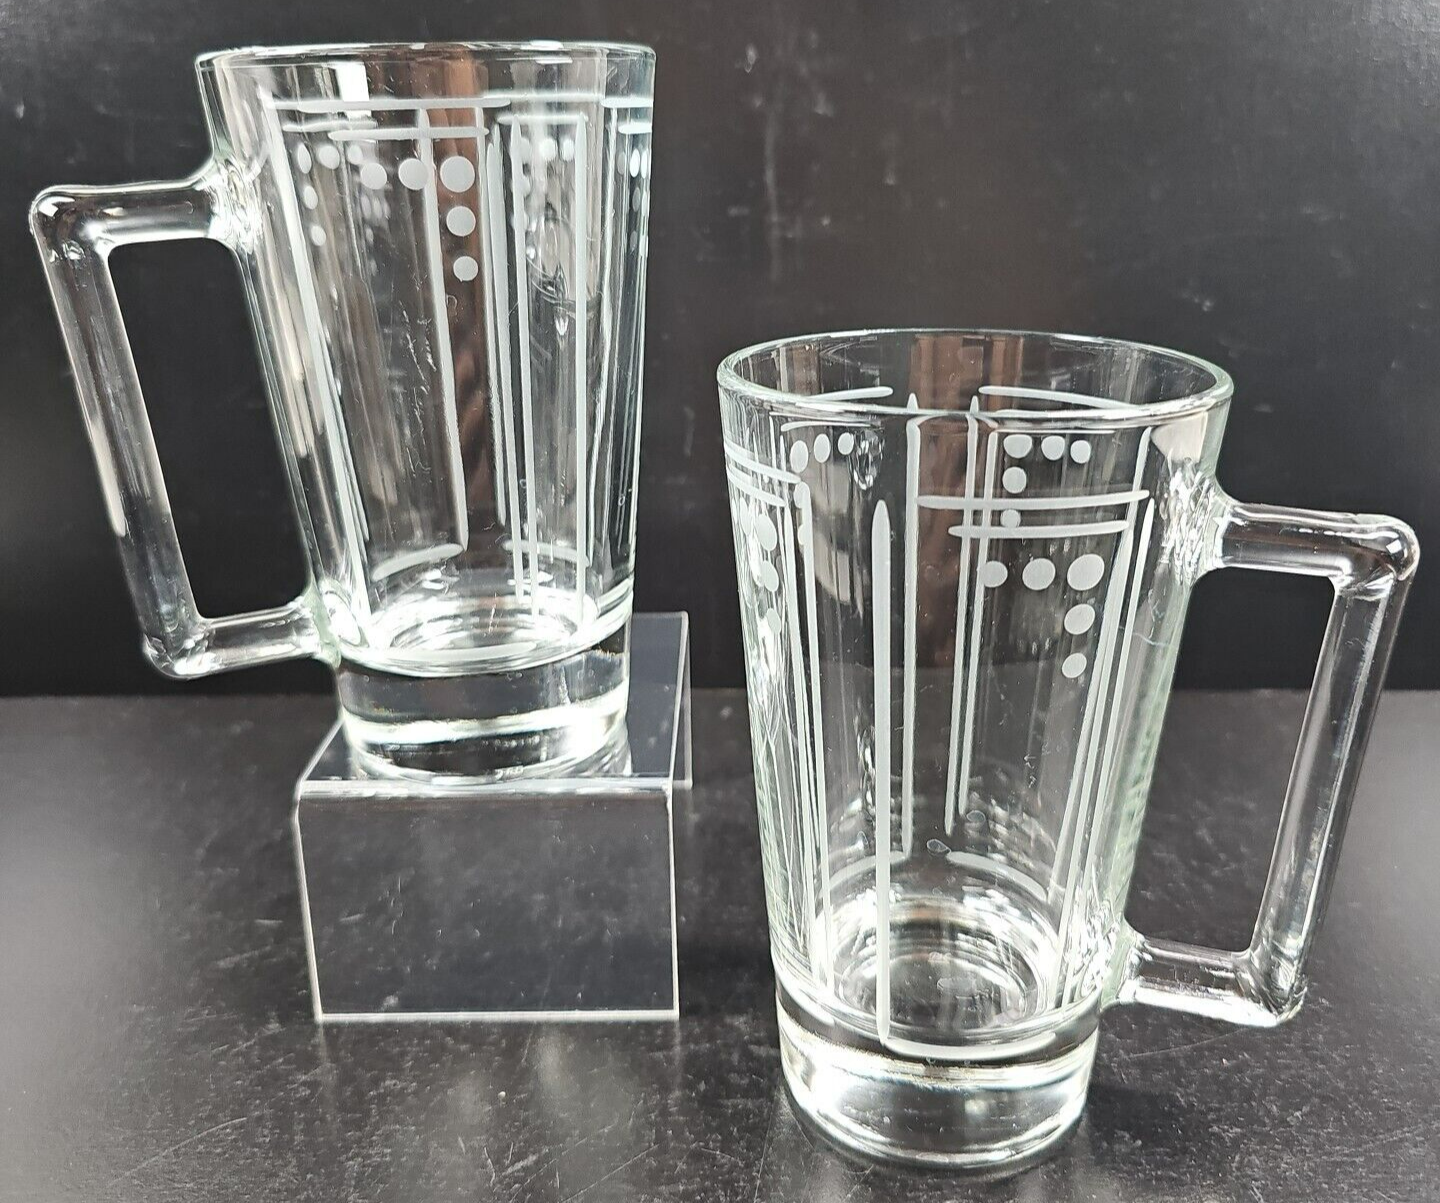 Primary image for 2 Princess House Aston 16 Oz Beer Mugs Set Clear Frosted Etched Dots Squares Lot